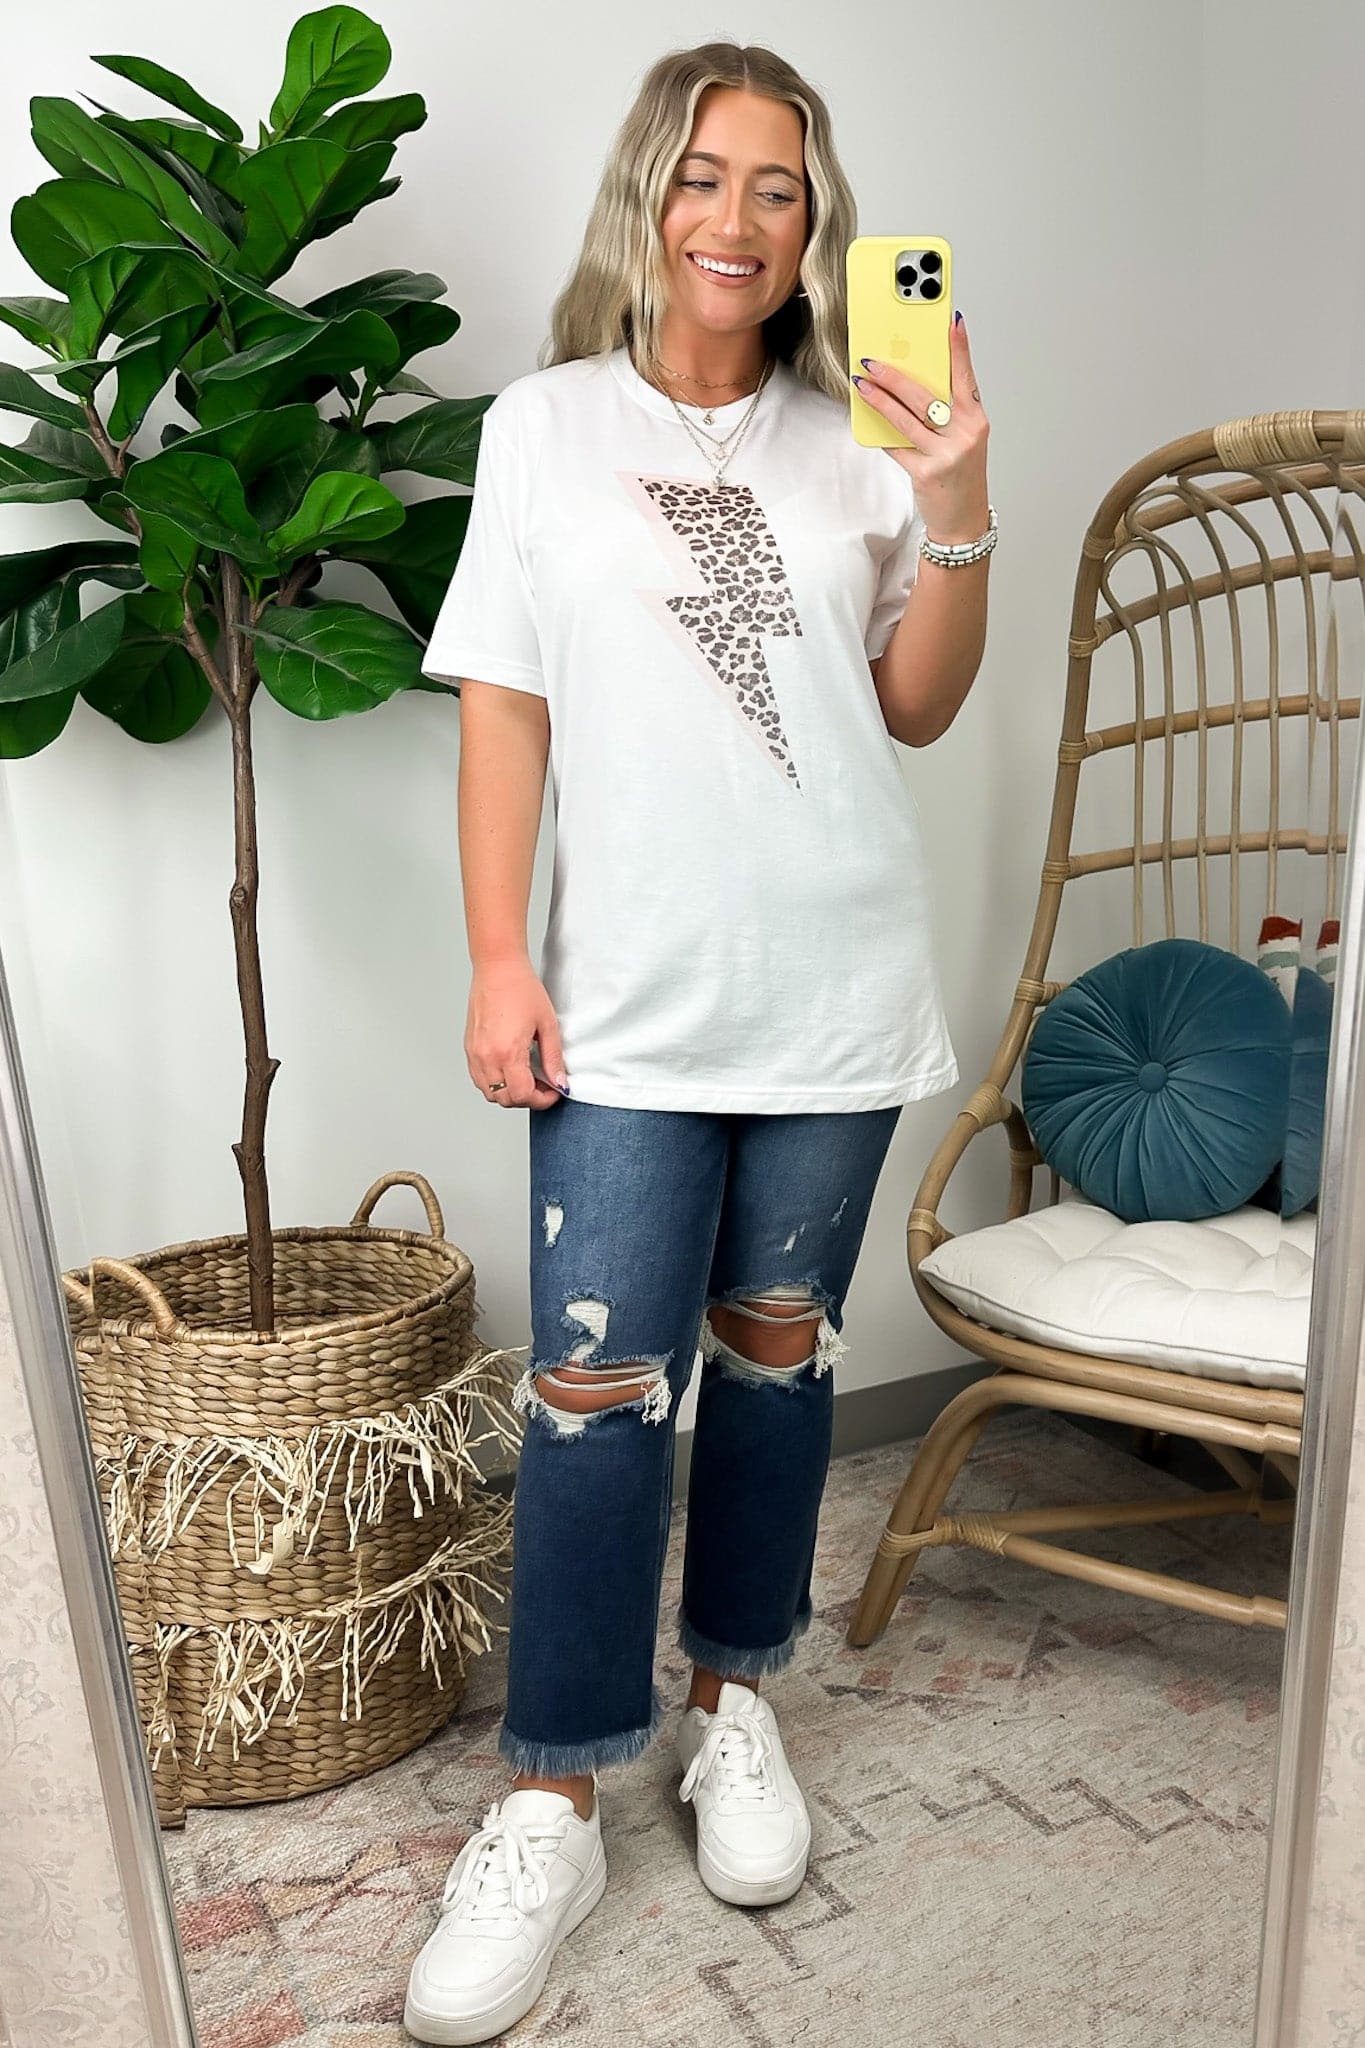  Wild Lightning Bolt Oversized Graphic Tee - FINAL SALE - Madison and Mallory